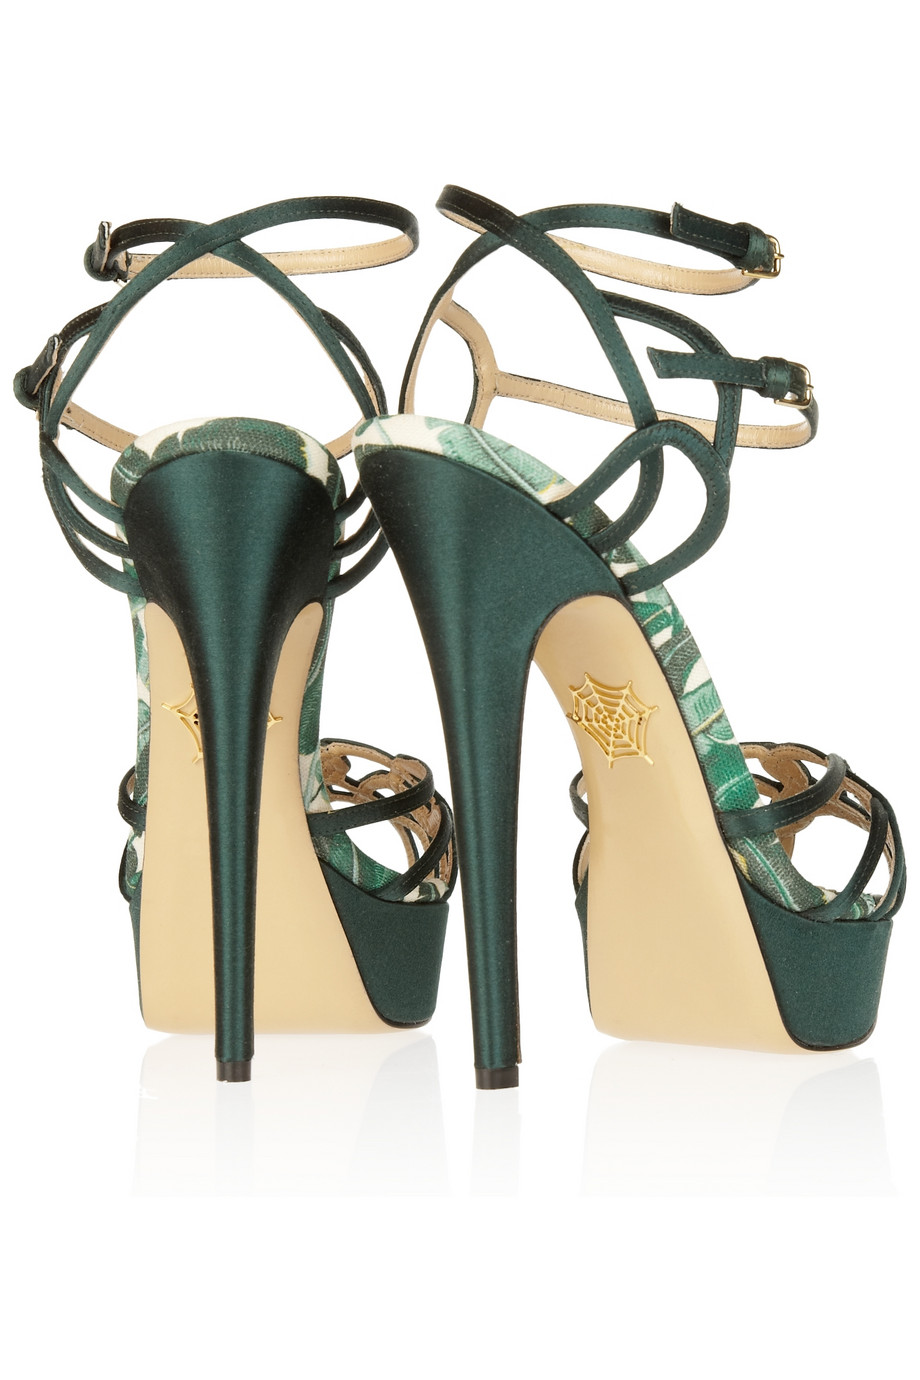 Lyst - Charlotte Olympia Ursula Satin Sandals in Green